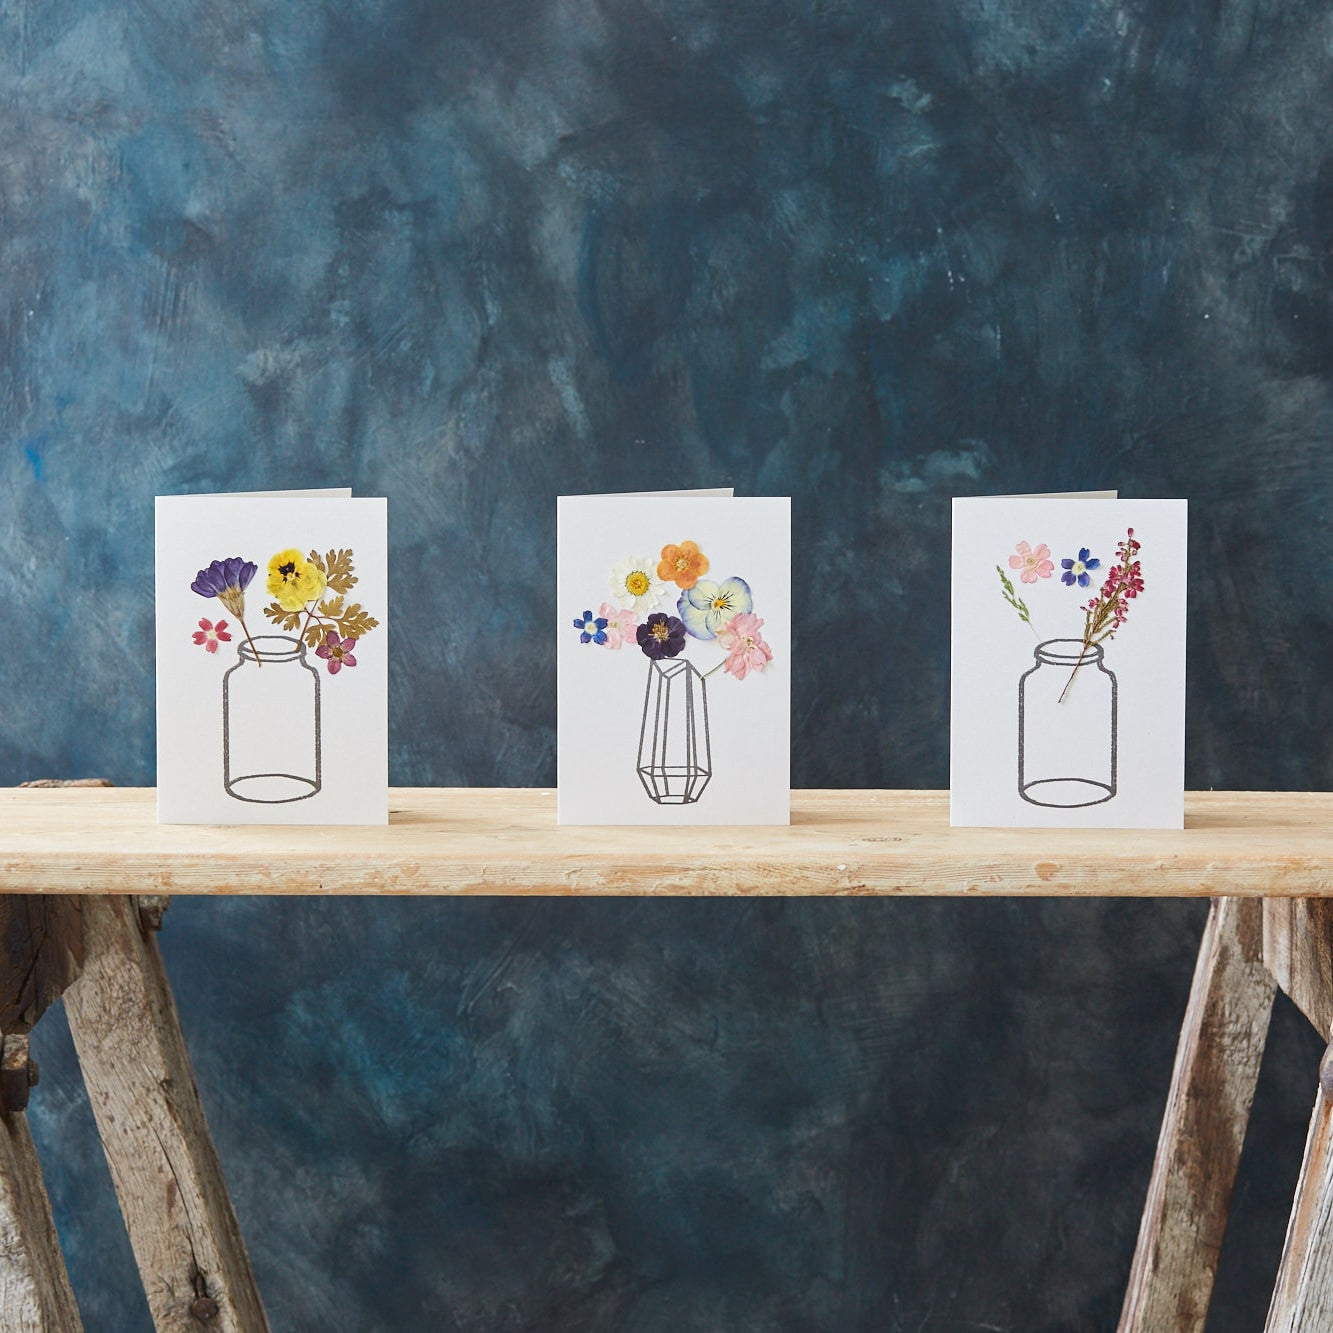 How to Make a Pressed Flower Card